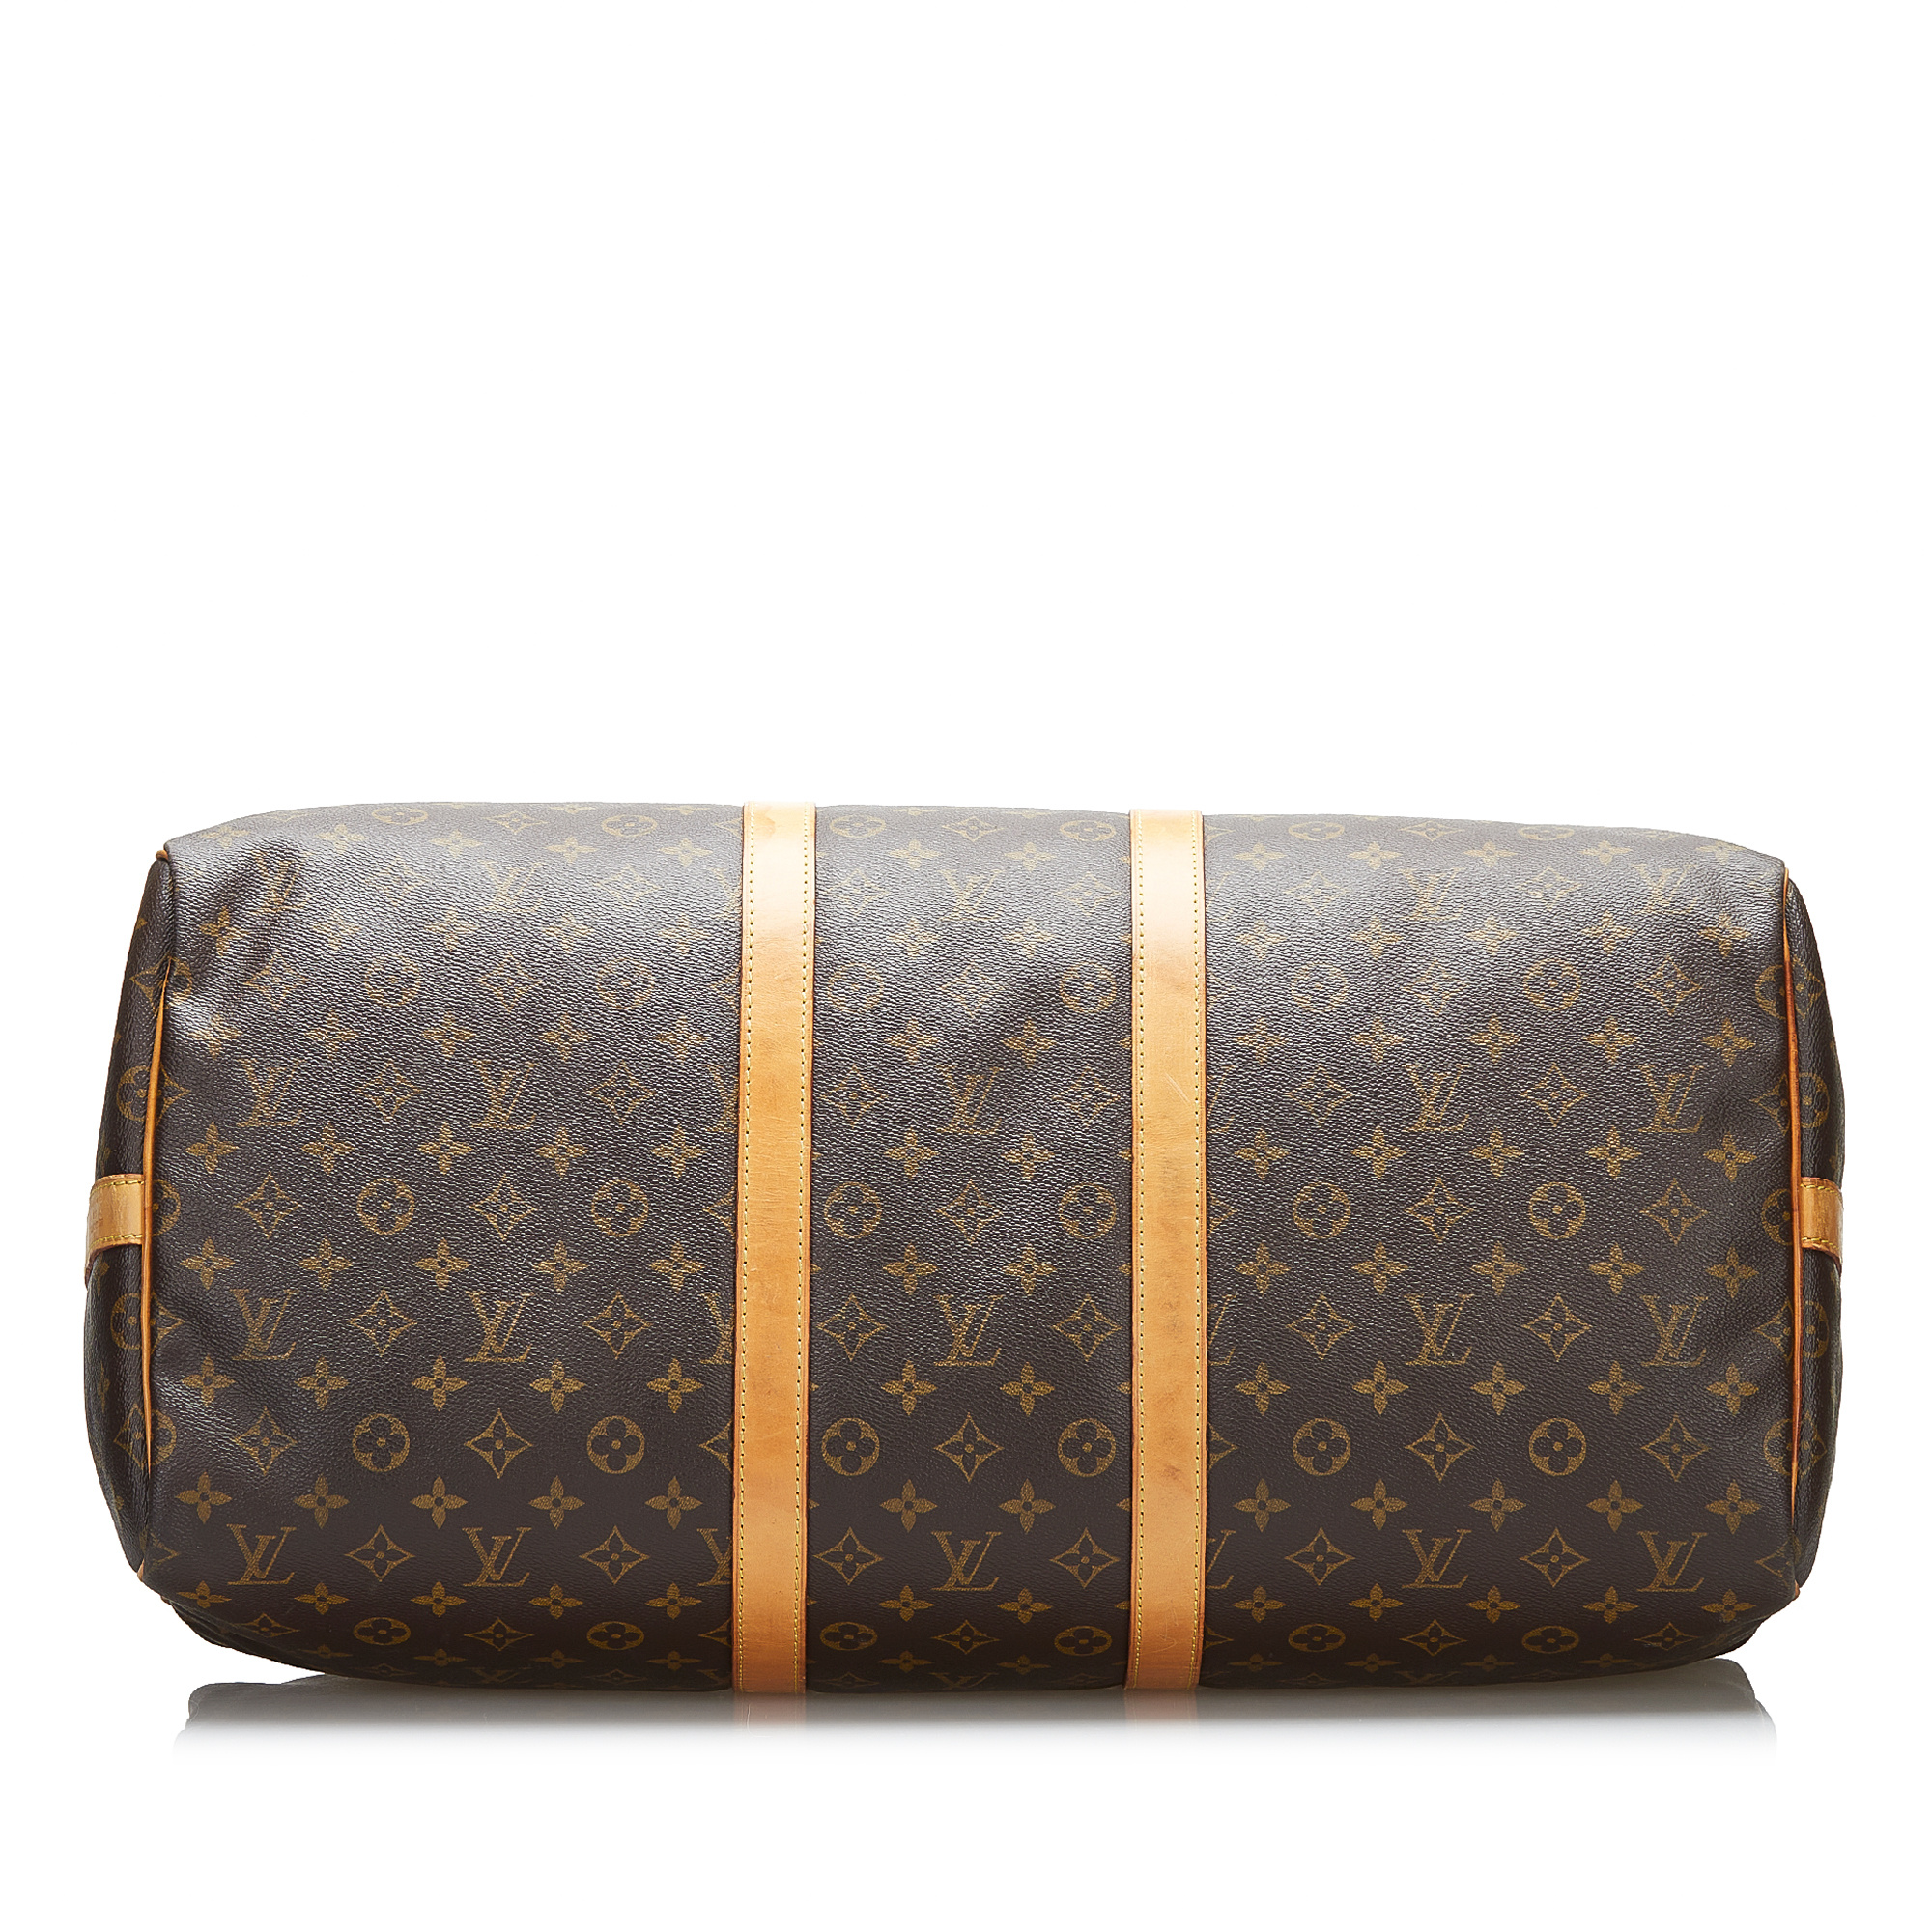 AUTHENTIC, PRE-OWNED] Louis Vuitton Monogram Keepall Bandouliere